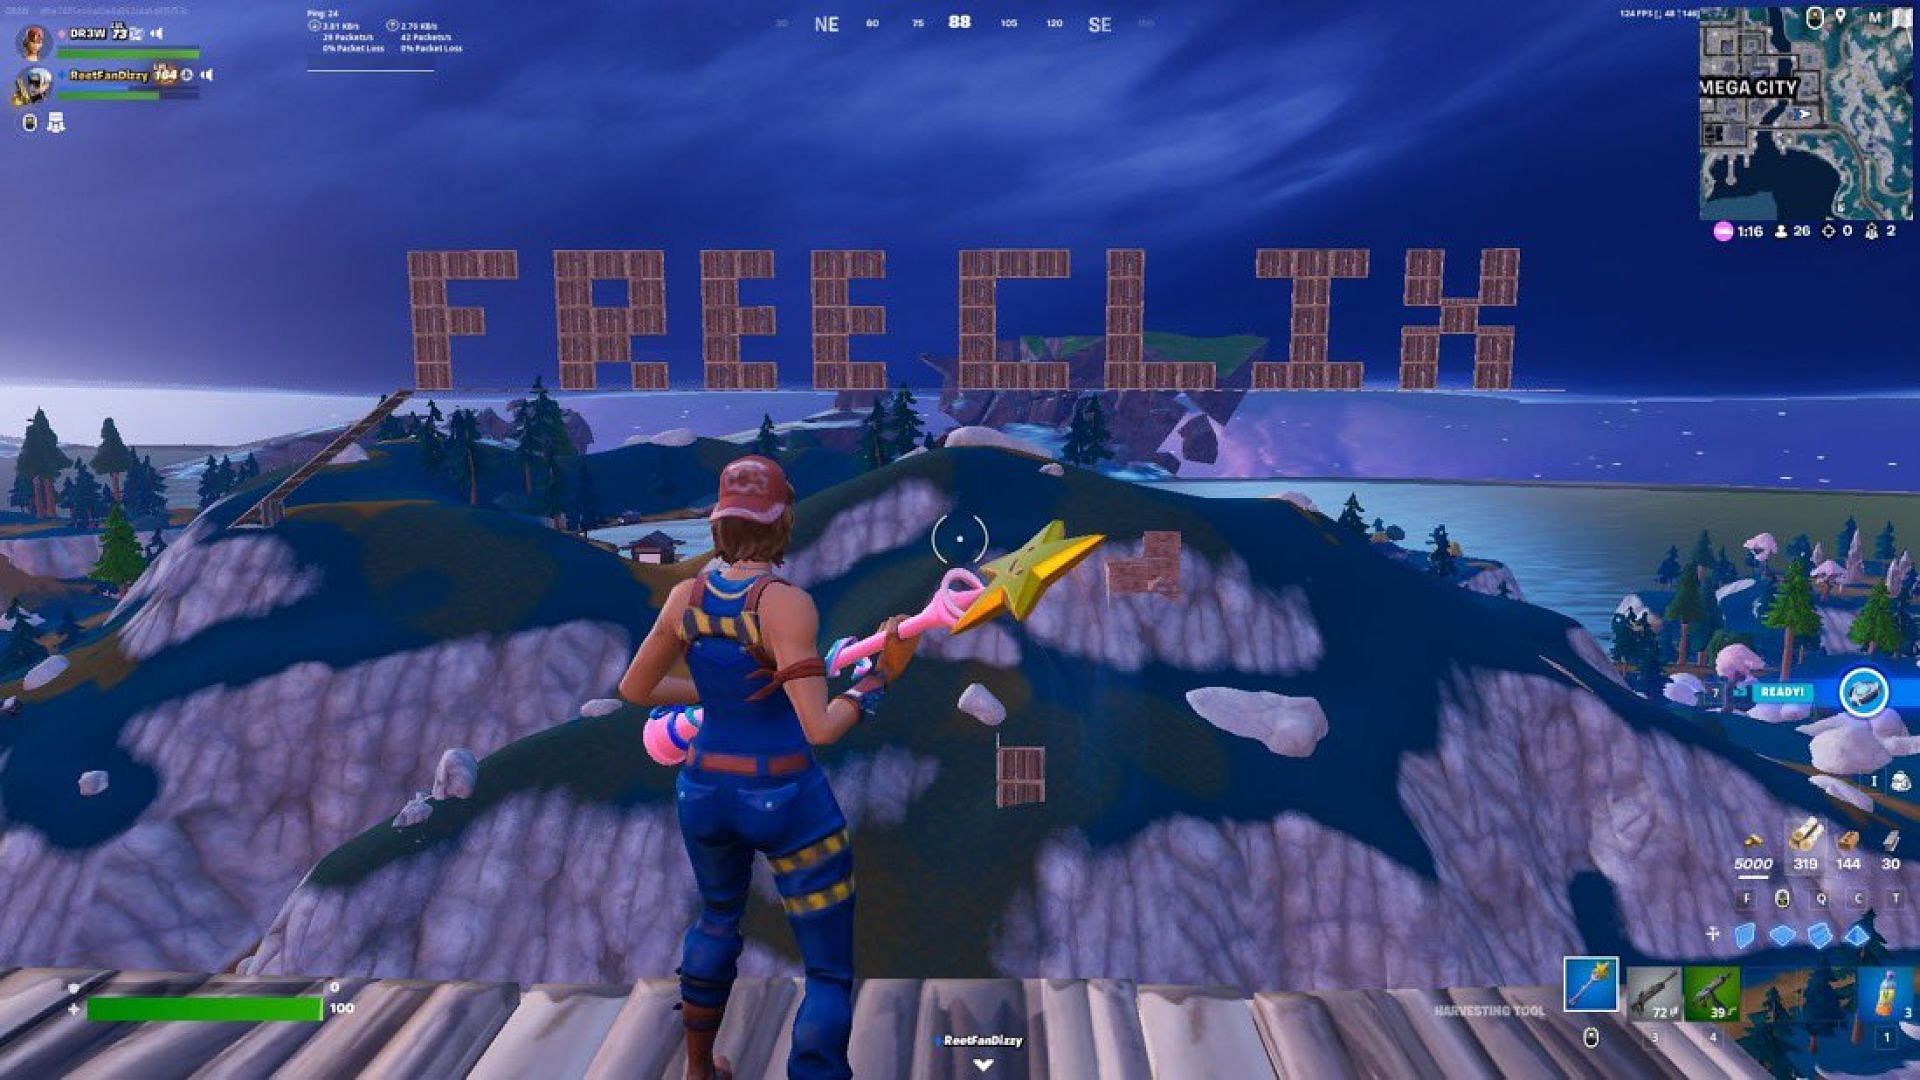 #FreeClix takes over Fortnite Twitter as fans speak out against his unfair ban (Image via Twitter/drewwall_)